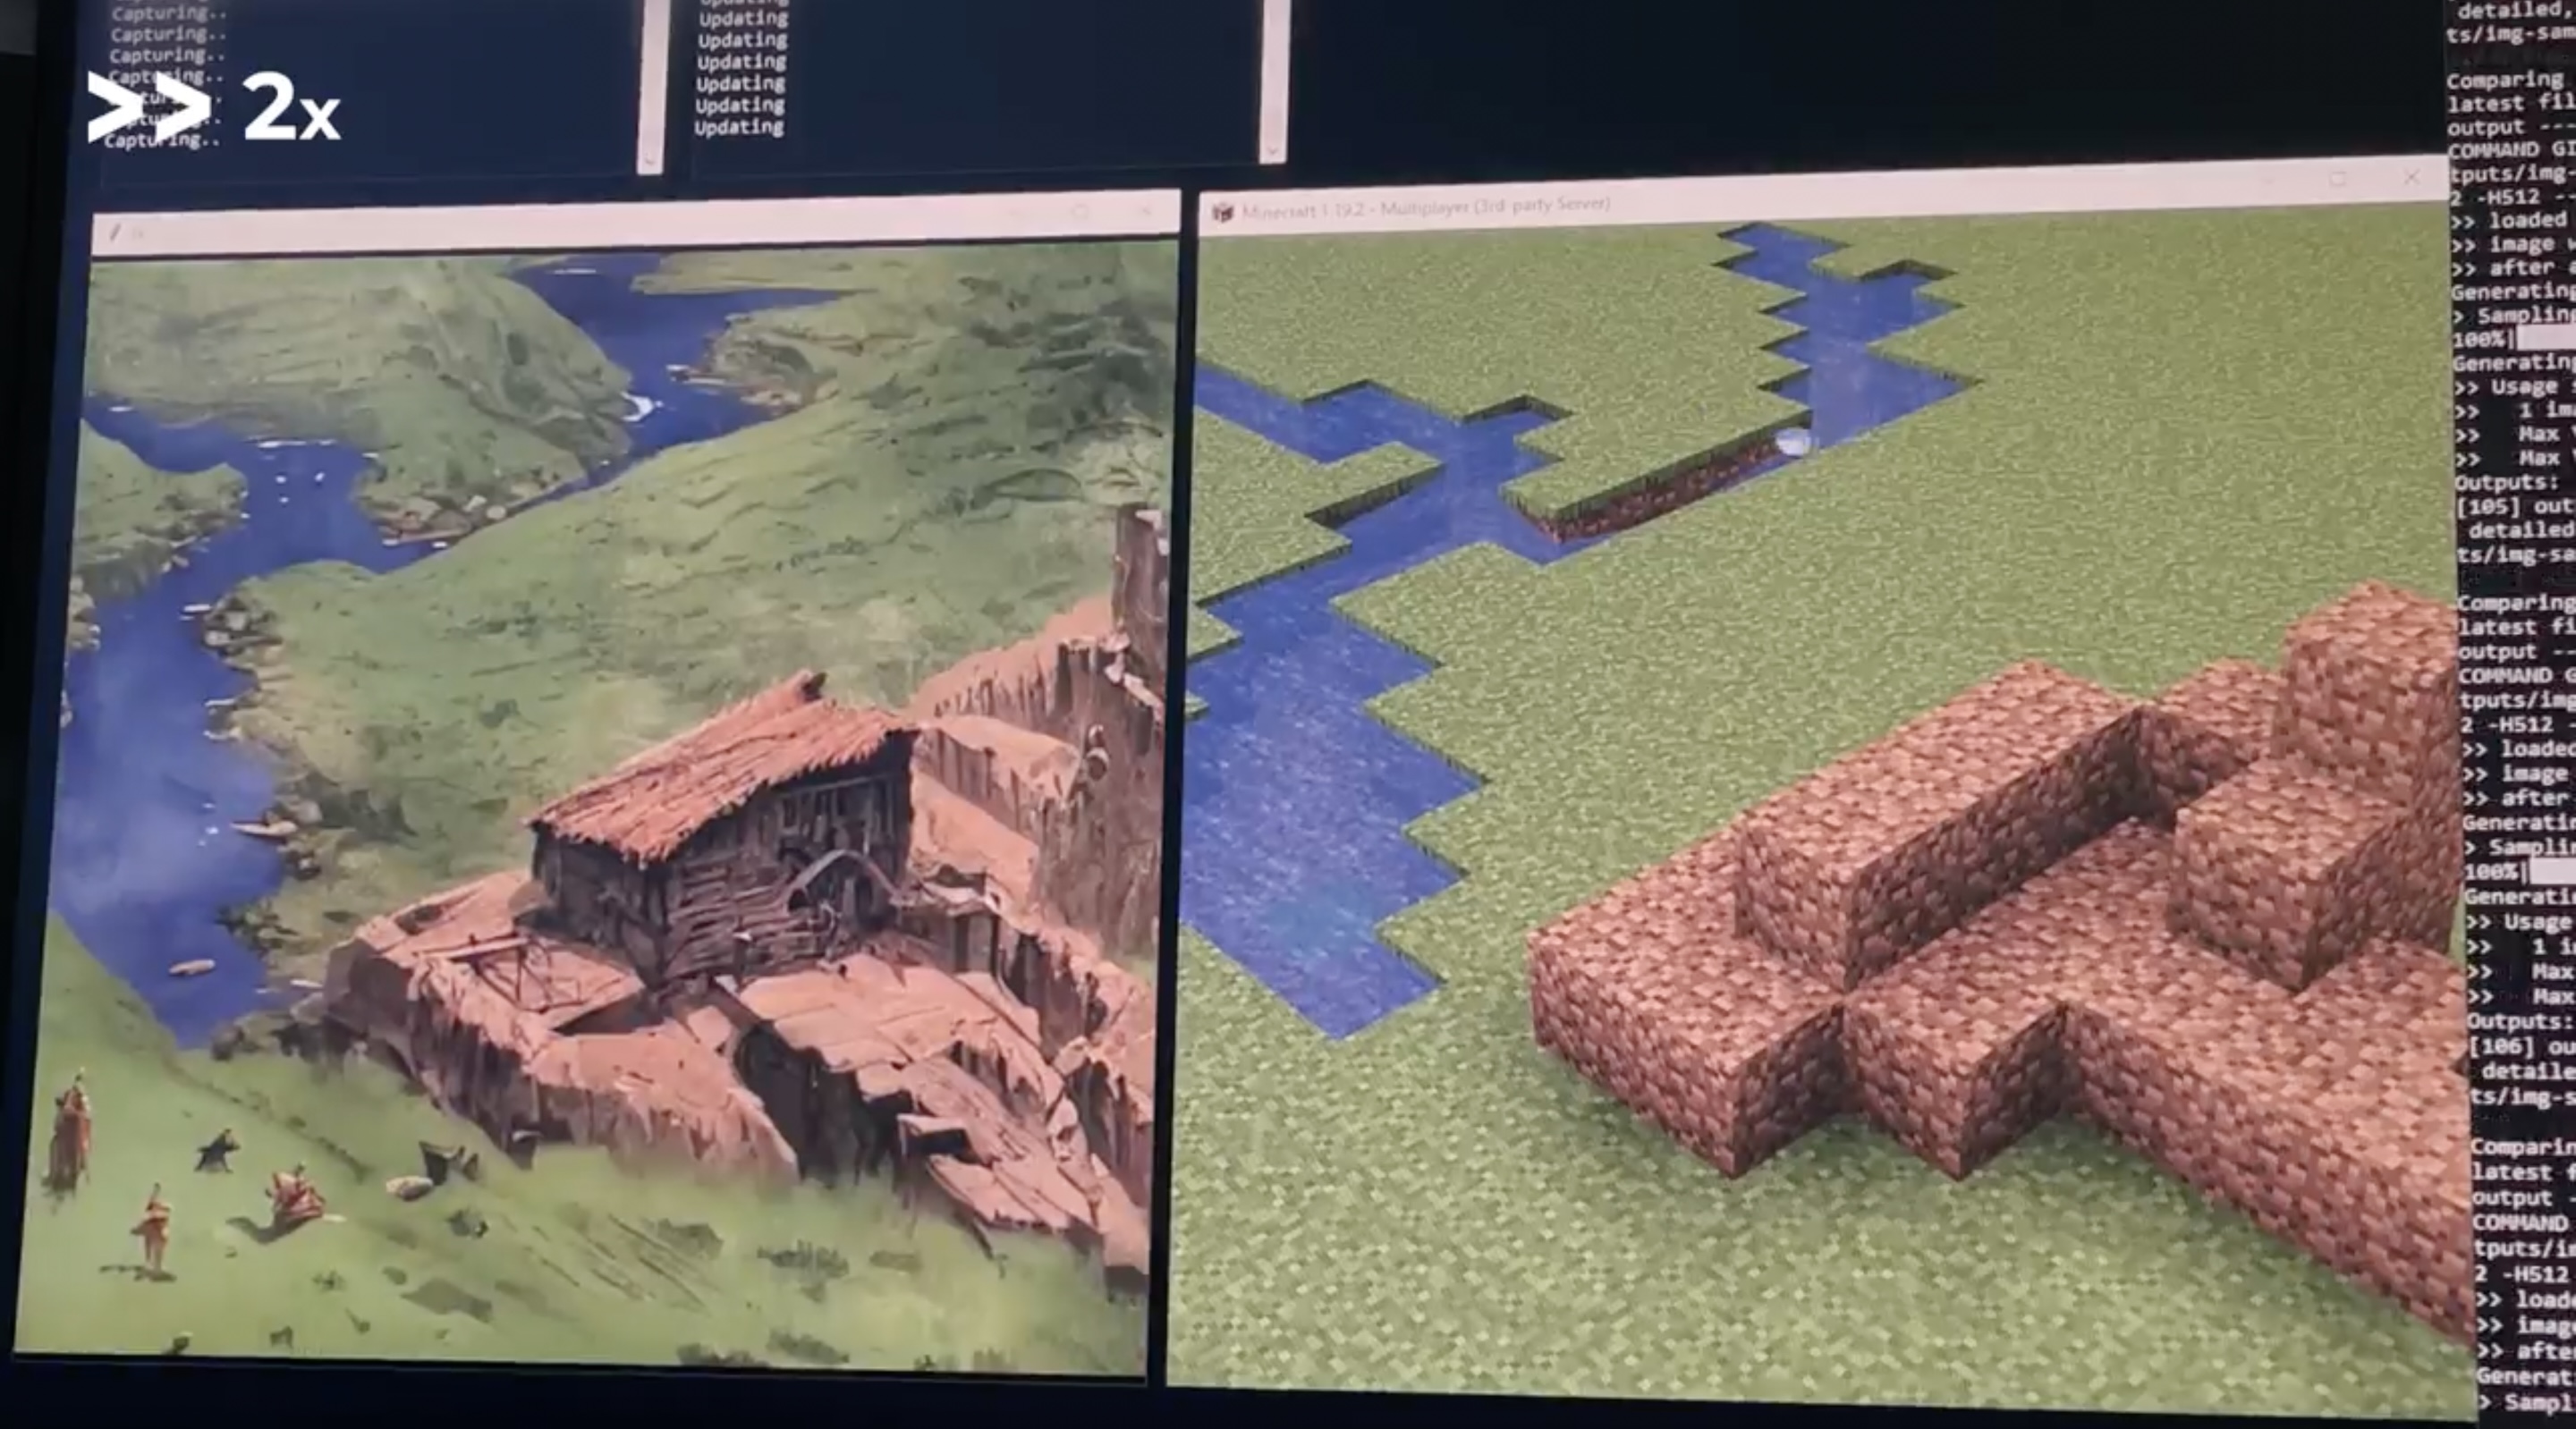 a minecraft lego toy of the warden and deep dark biome, Stable Diffusion